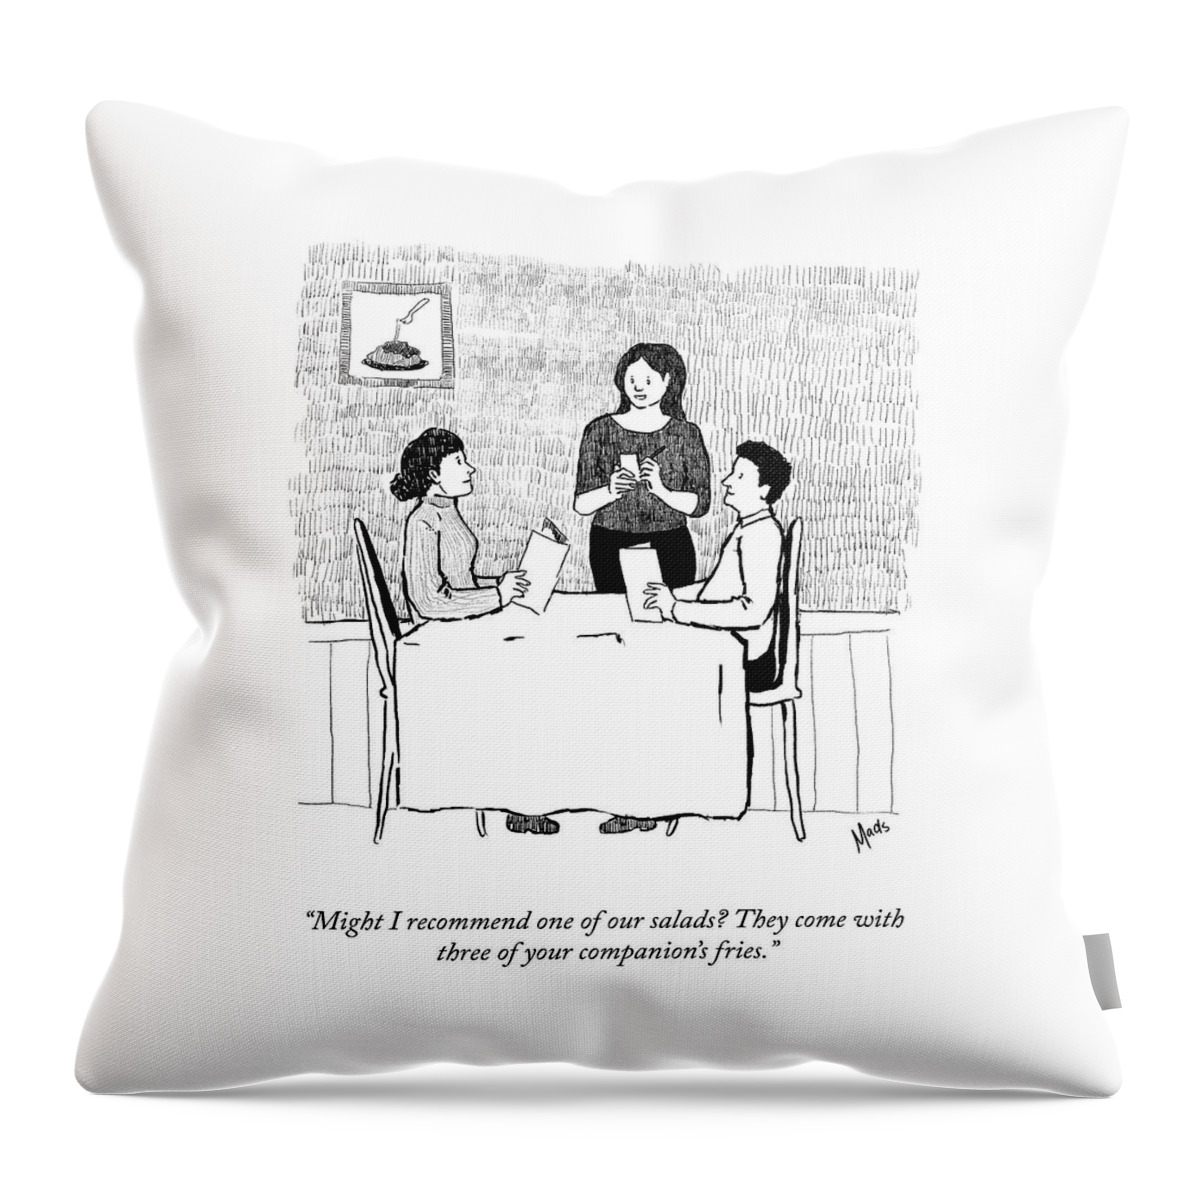 Your Companion's Fries Throw Pillow